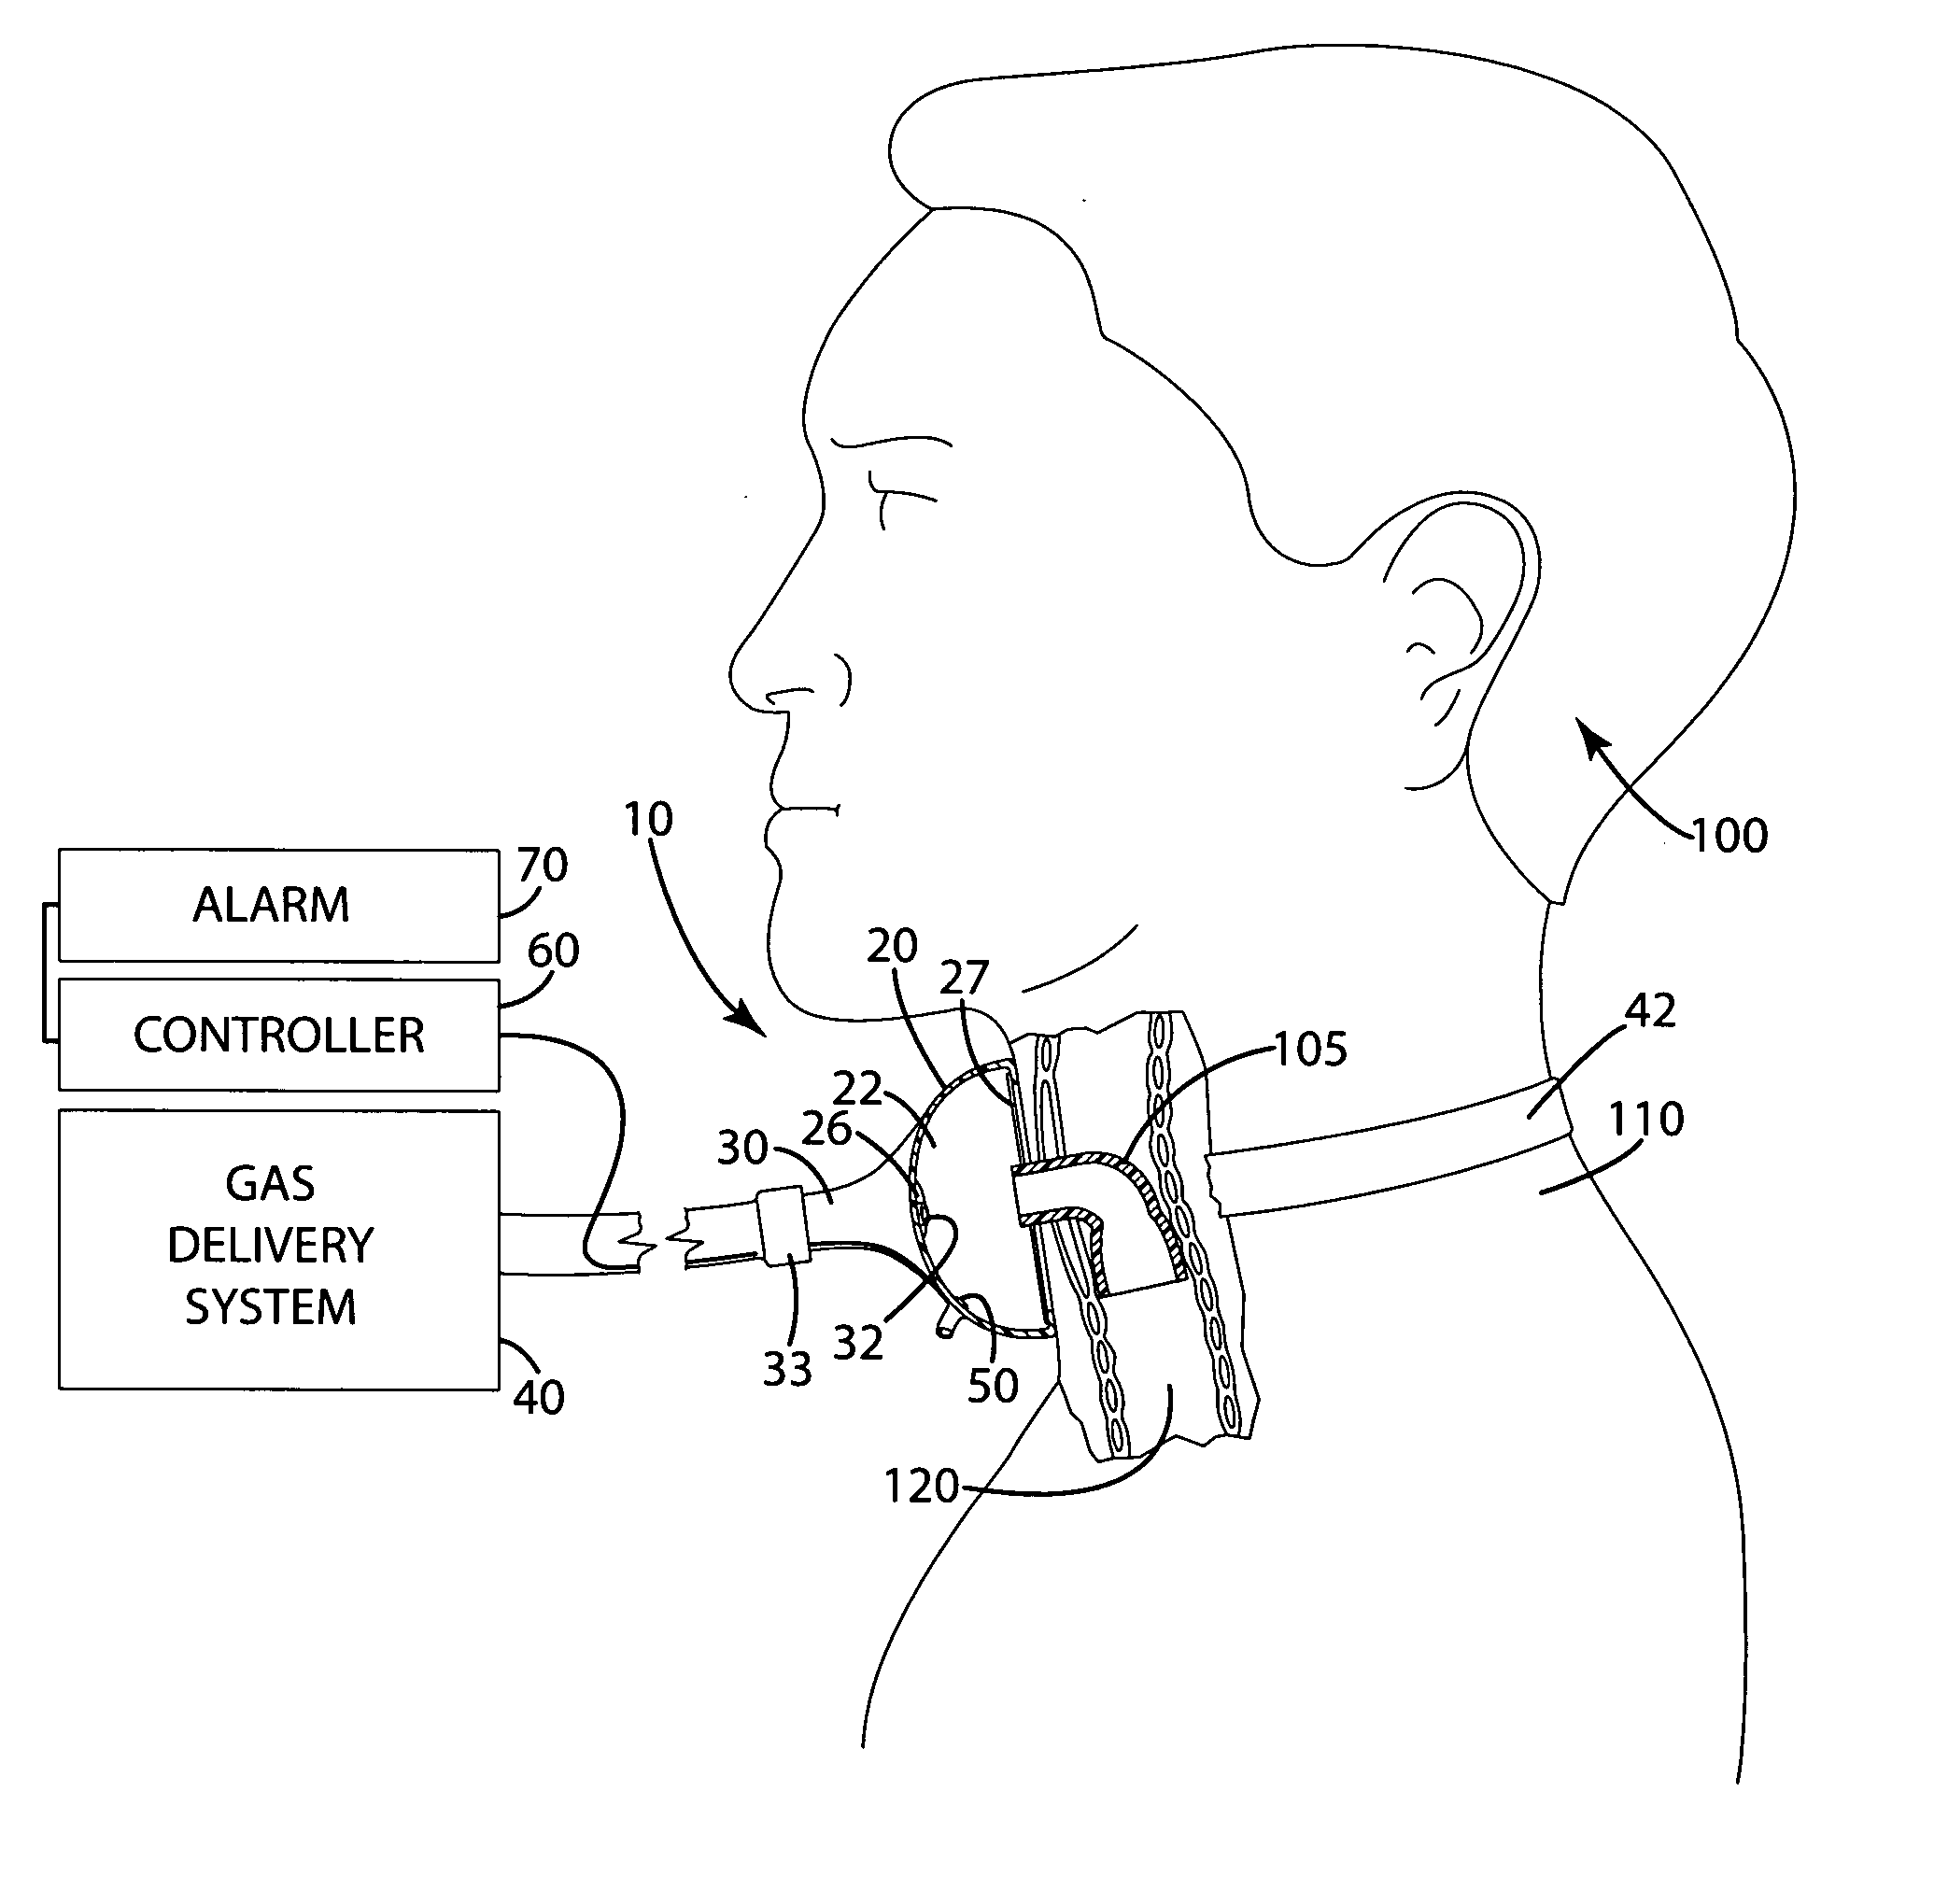 Respiratory monitoring apparatus and related method